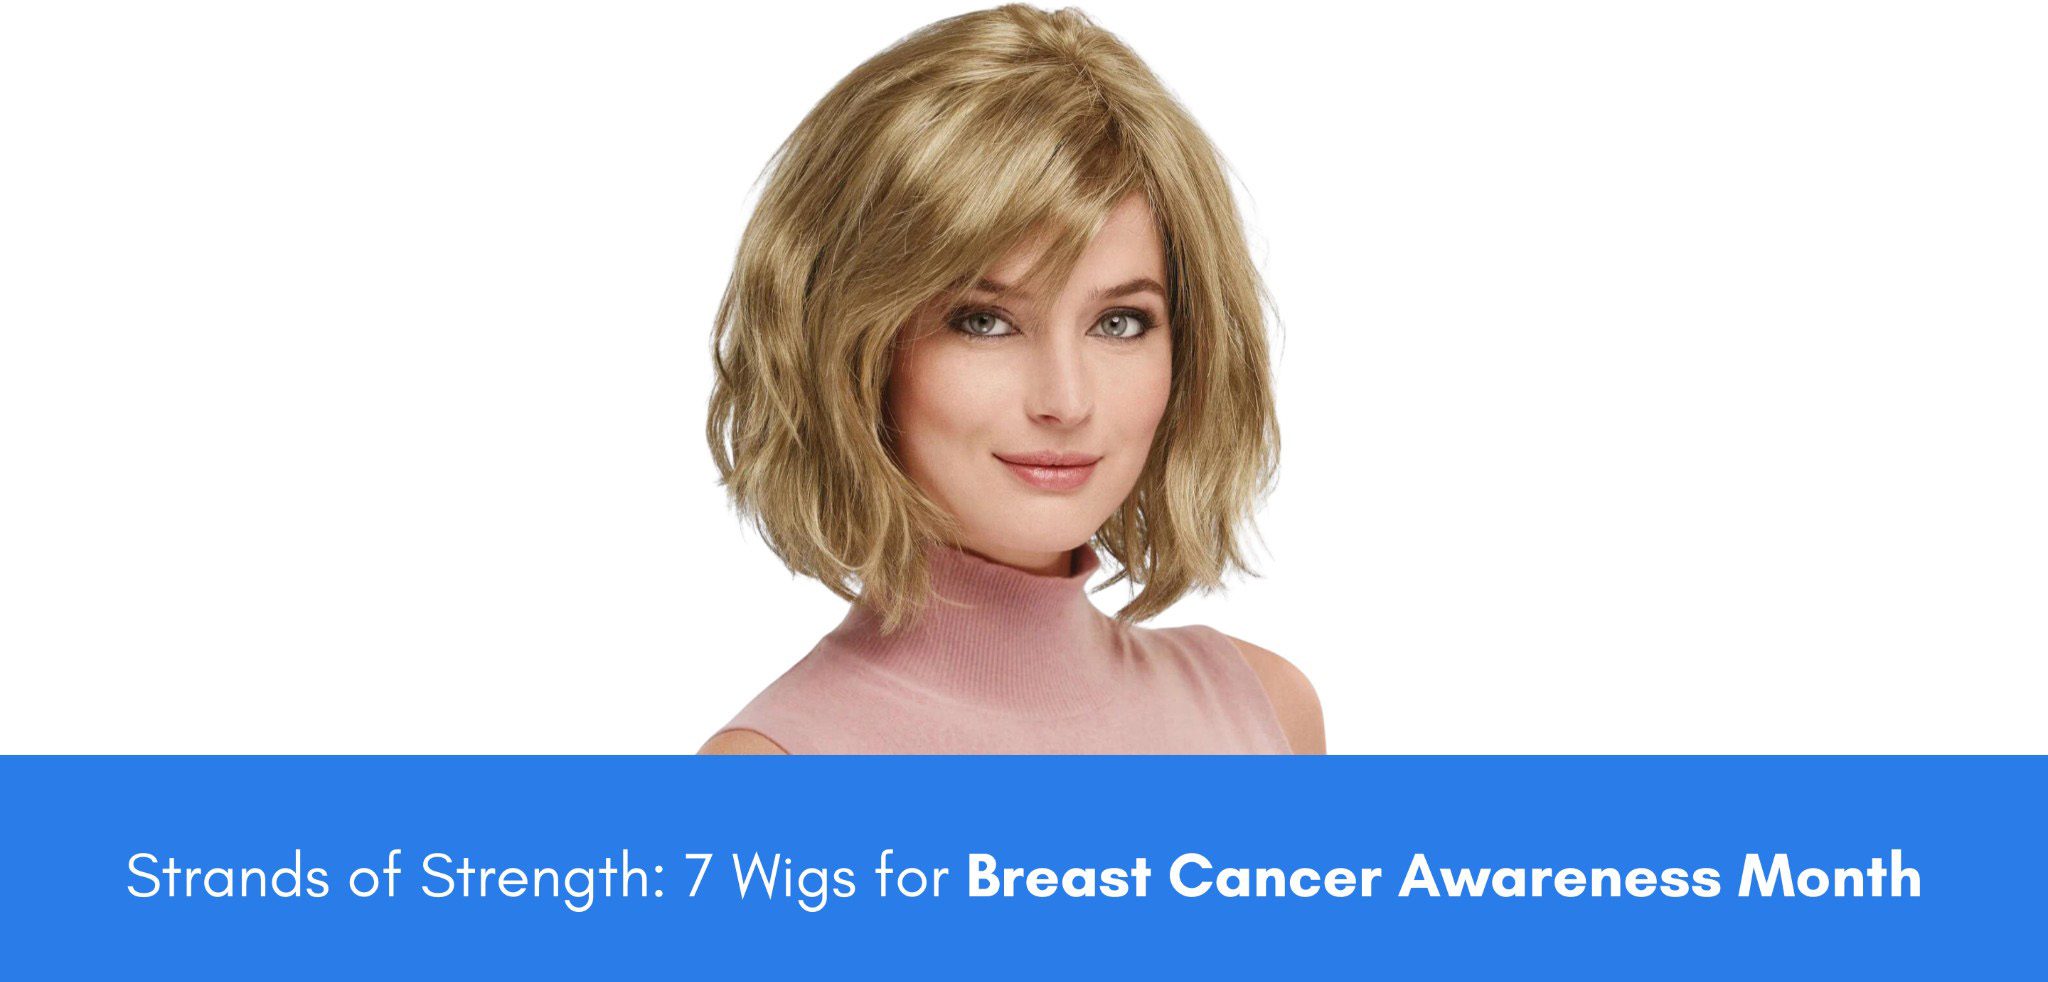 Strands of Strength: 7 Wigs for Breast Cancer Awareness Month